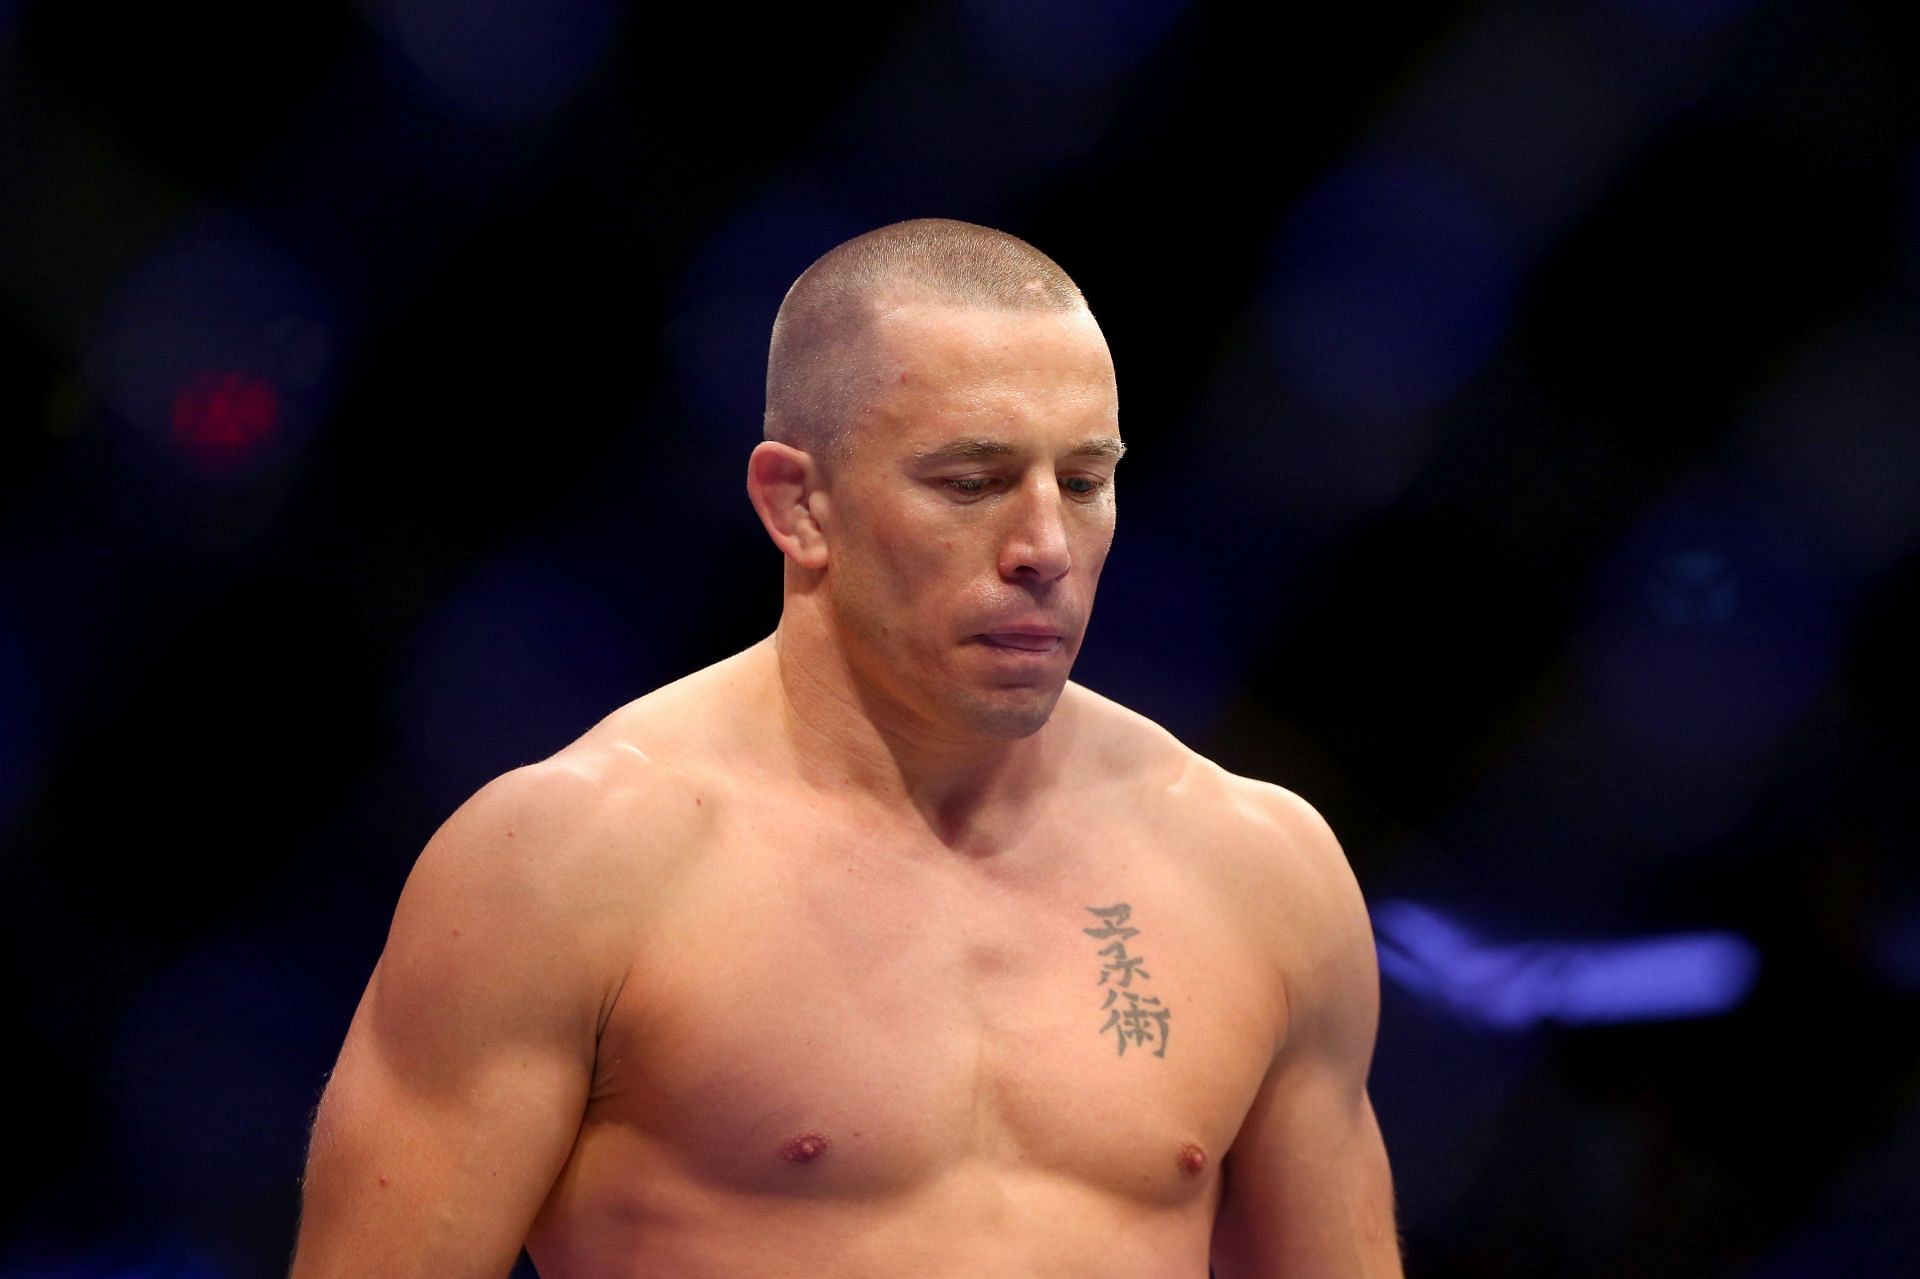 Georges St-Pierre had one of the most dominant championship runs in UFC history